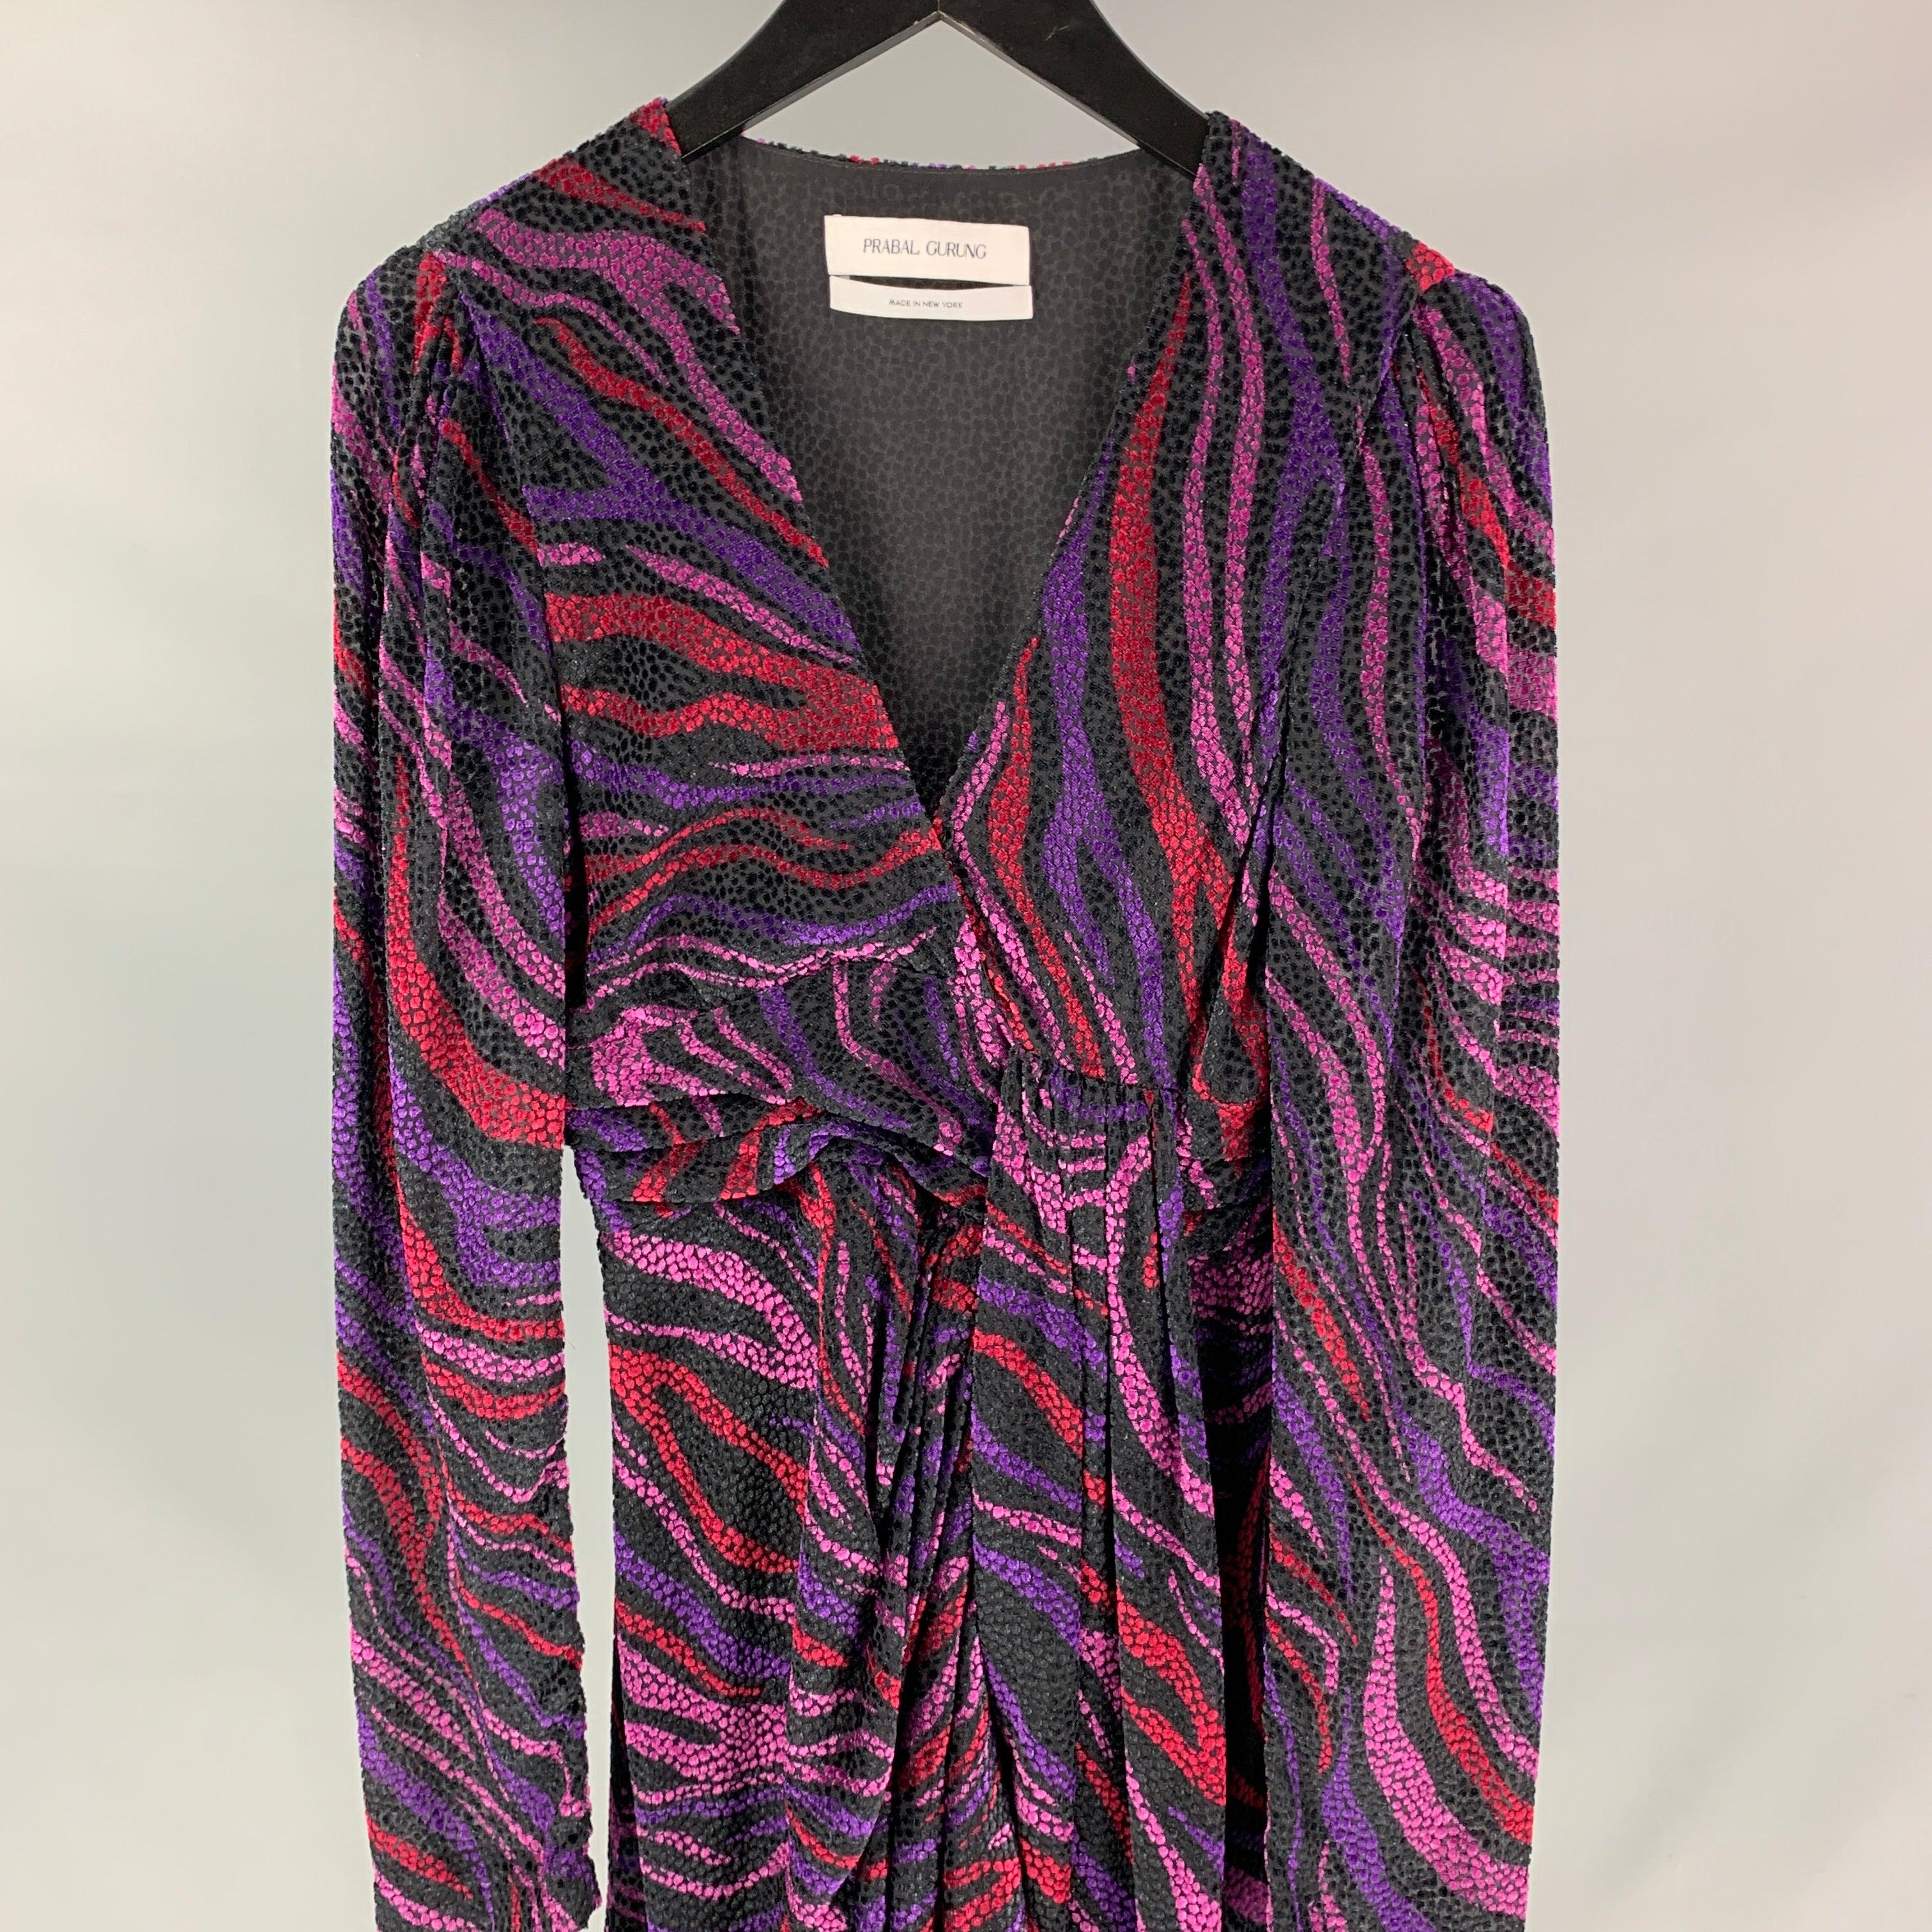 PRABAL GURUNG dress comes in a purple & black burnout viscose / silk featuring a v-neck, long strap detail, long sleeve, and a side zipper closure. Made in USA. Excellent
Pre-Owned Condition. 

Marked:   0 

Measurements: 
 
Shoulder: 14.5 inches 